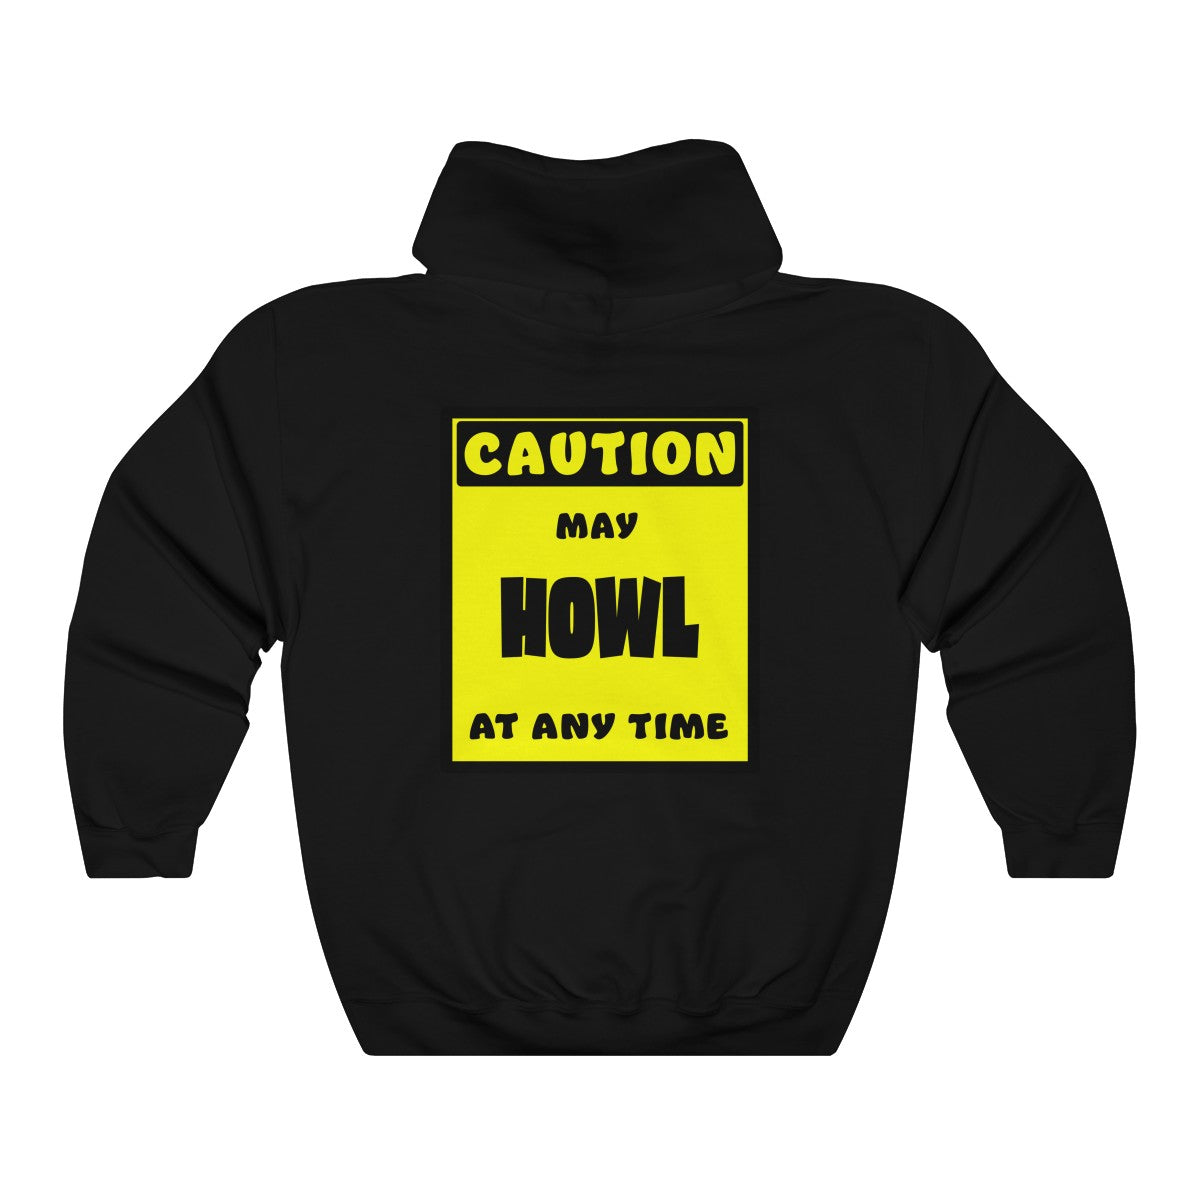 CAUTION! May HOWL at any time! - Hoodie Hoodie AFLT-Whootorca Black S 